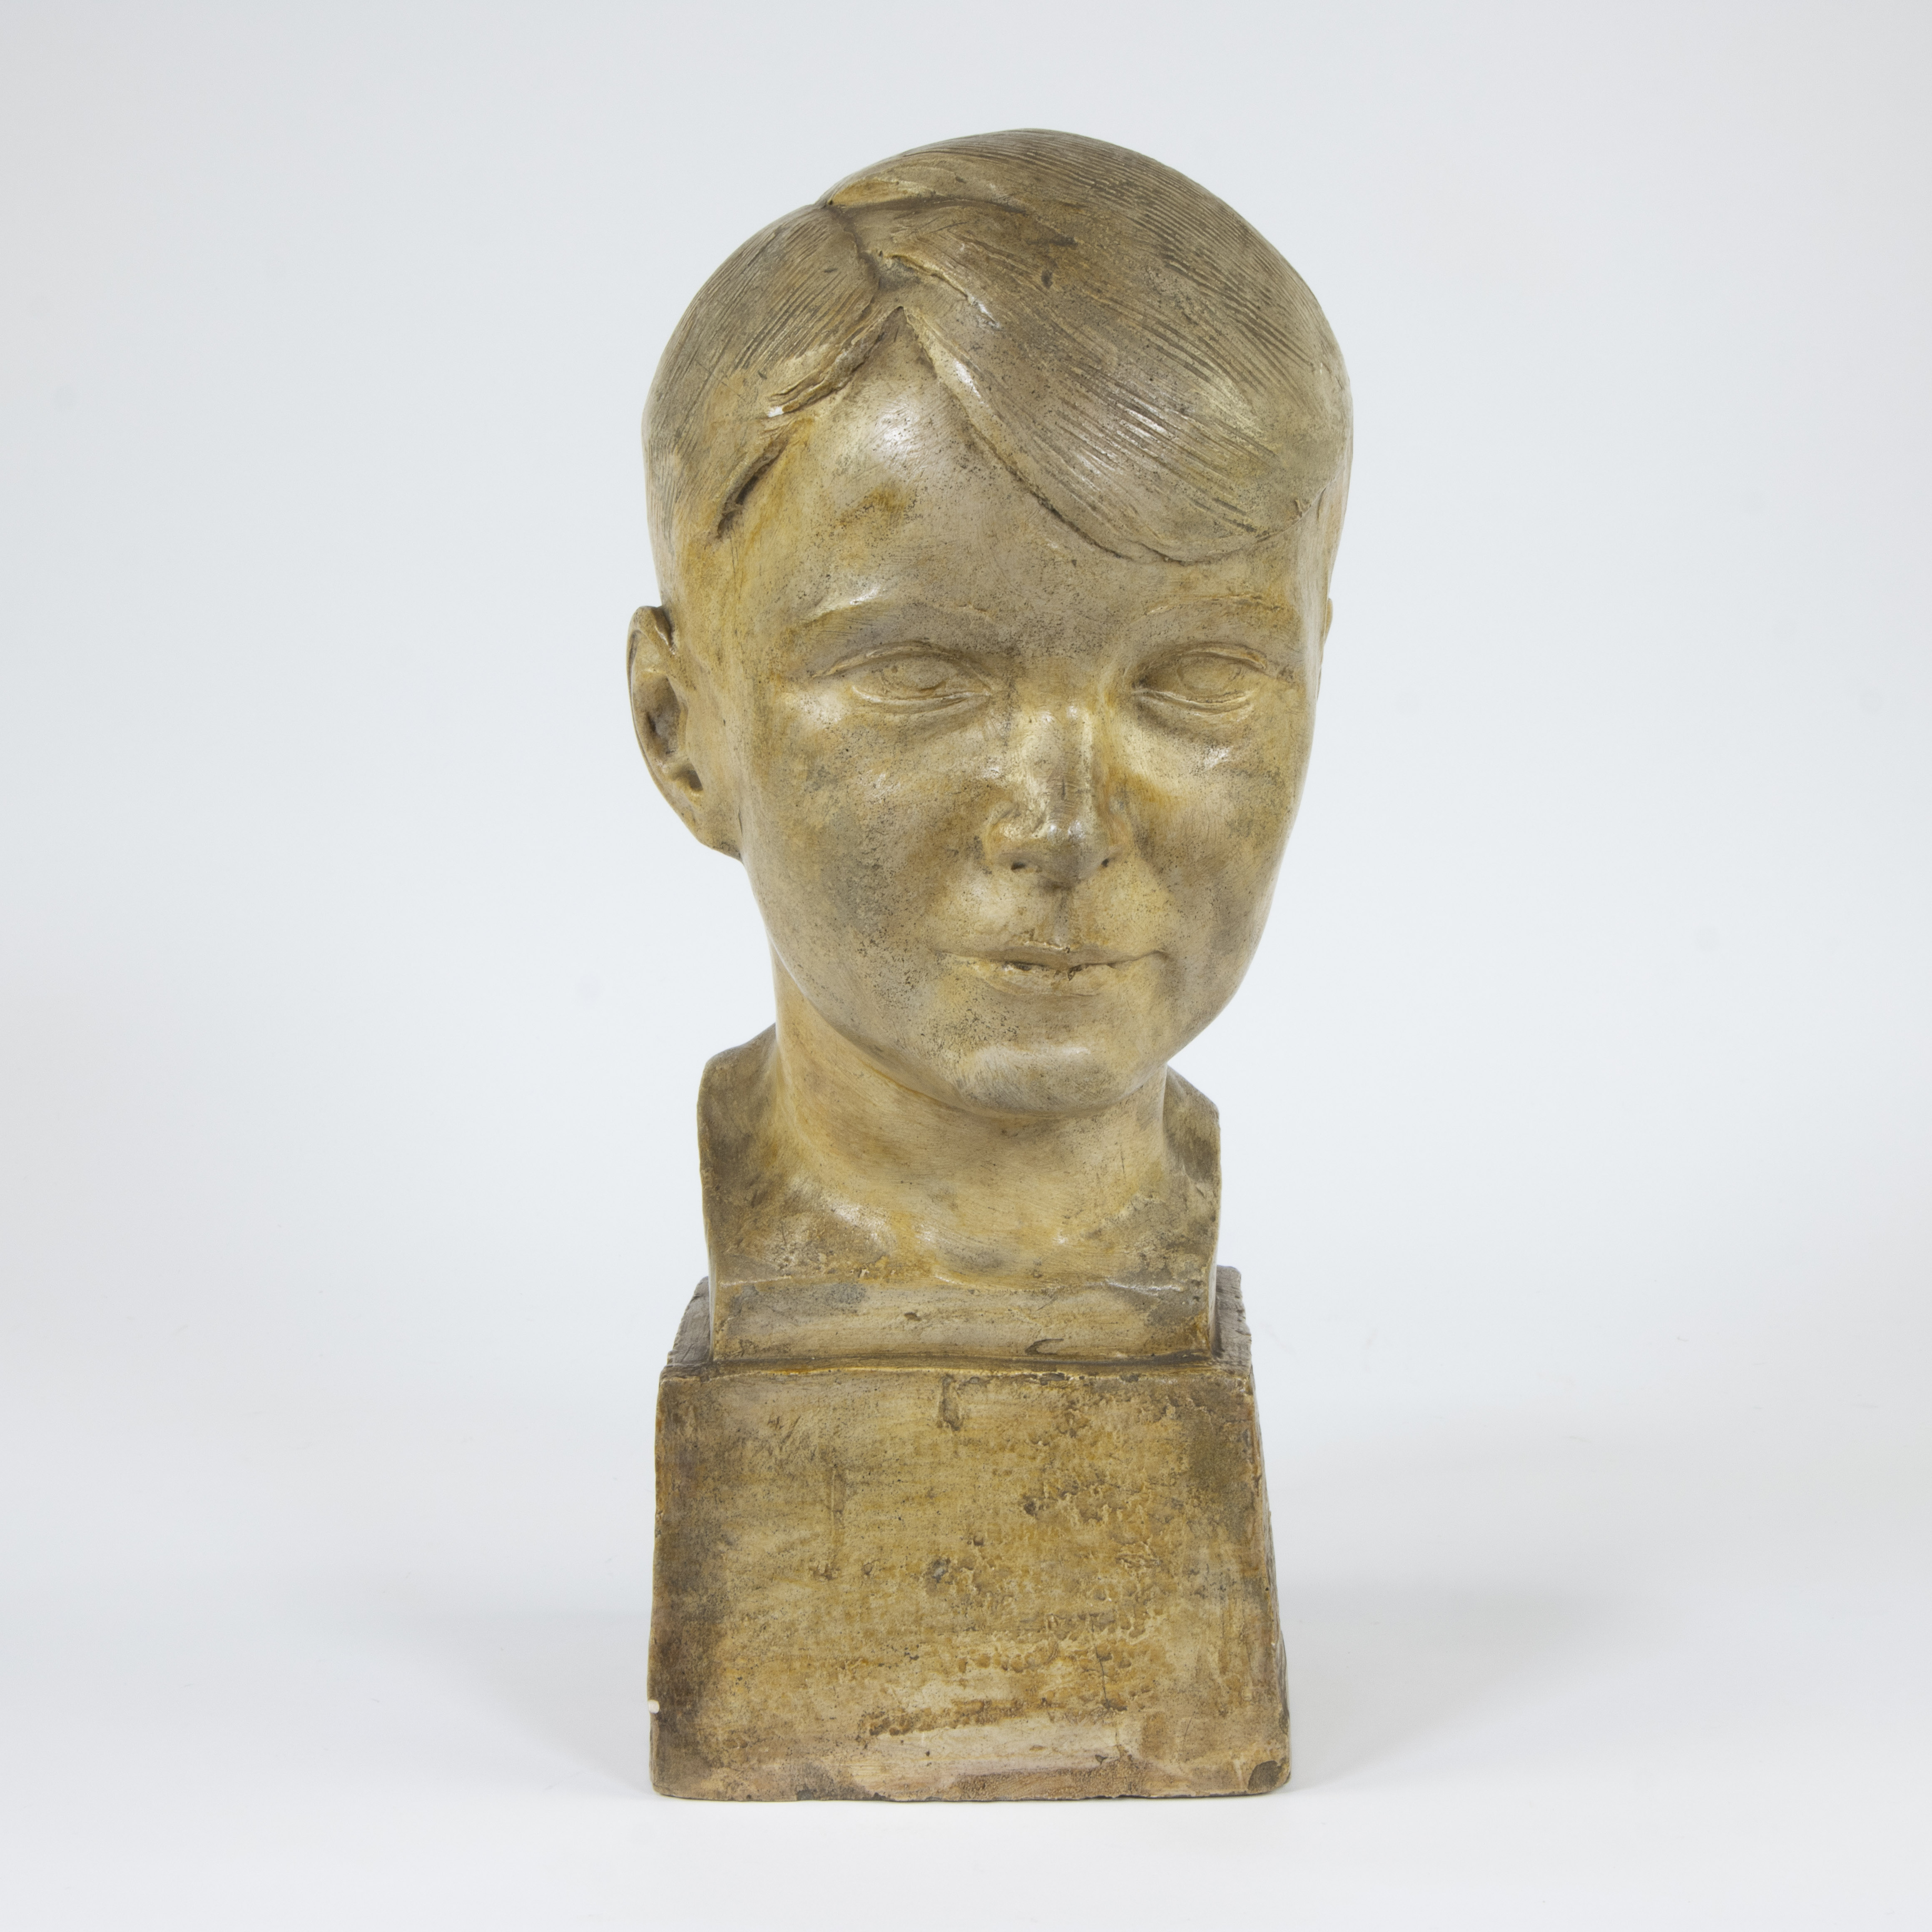 Olivier PIETTE (1885-1948), patinated plaster sculpture of a boy's head, signed